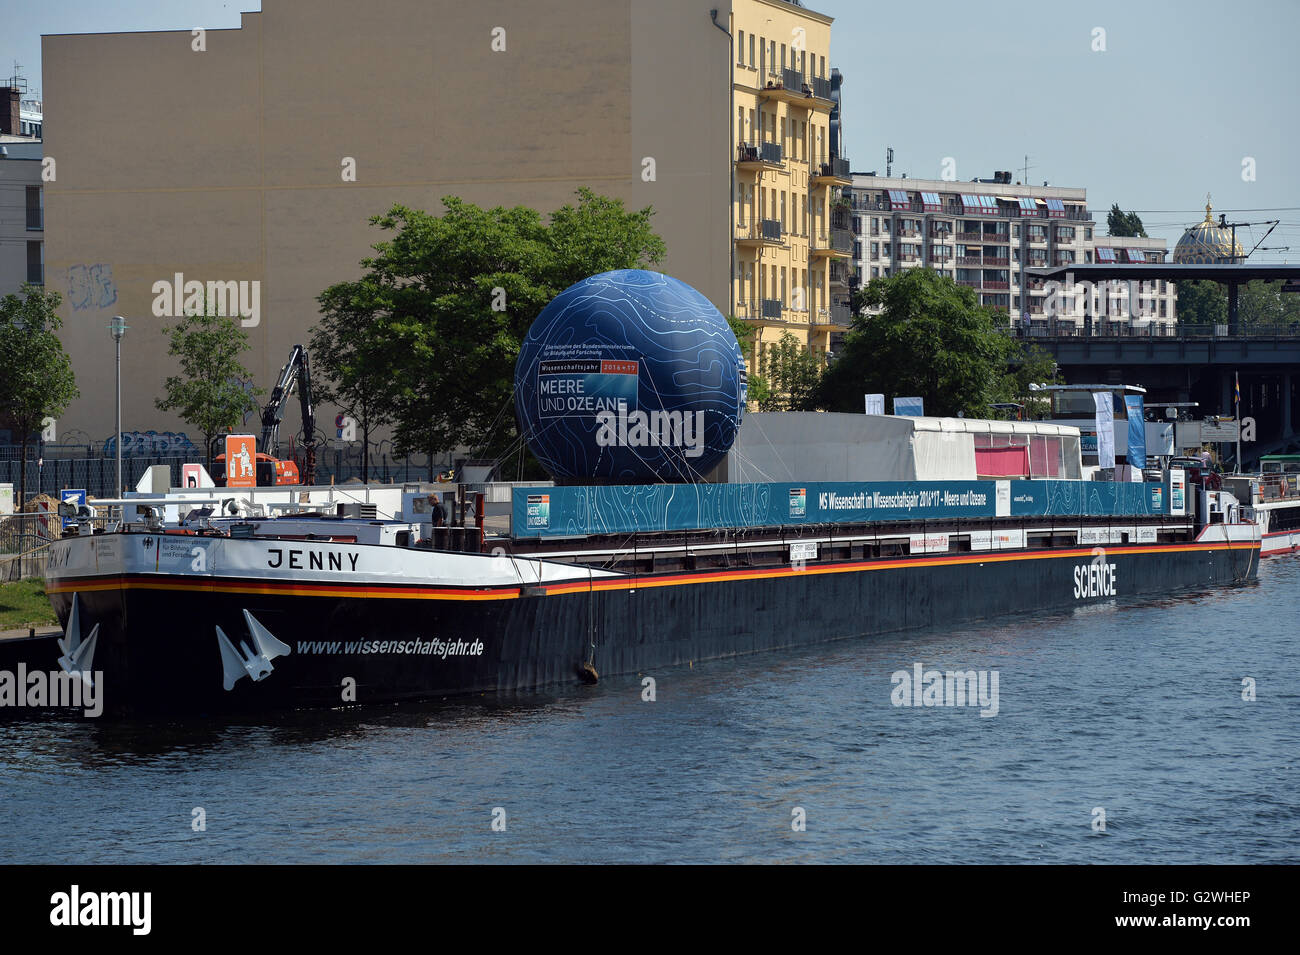 Berlin, Germany. 4th June, 2016. The exhibition ship 'MS Wissenschaft' on the Schiffbauerdamm in Berlin, Germany, 4 June 2016. The ship is taking the exhibition Meere und Ozeane (seas and oceans) on tour to 33 German cities. PHOTO: MAURIZIO GAMBARINI/DPA/Alamy Live News Stock Photo